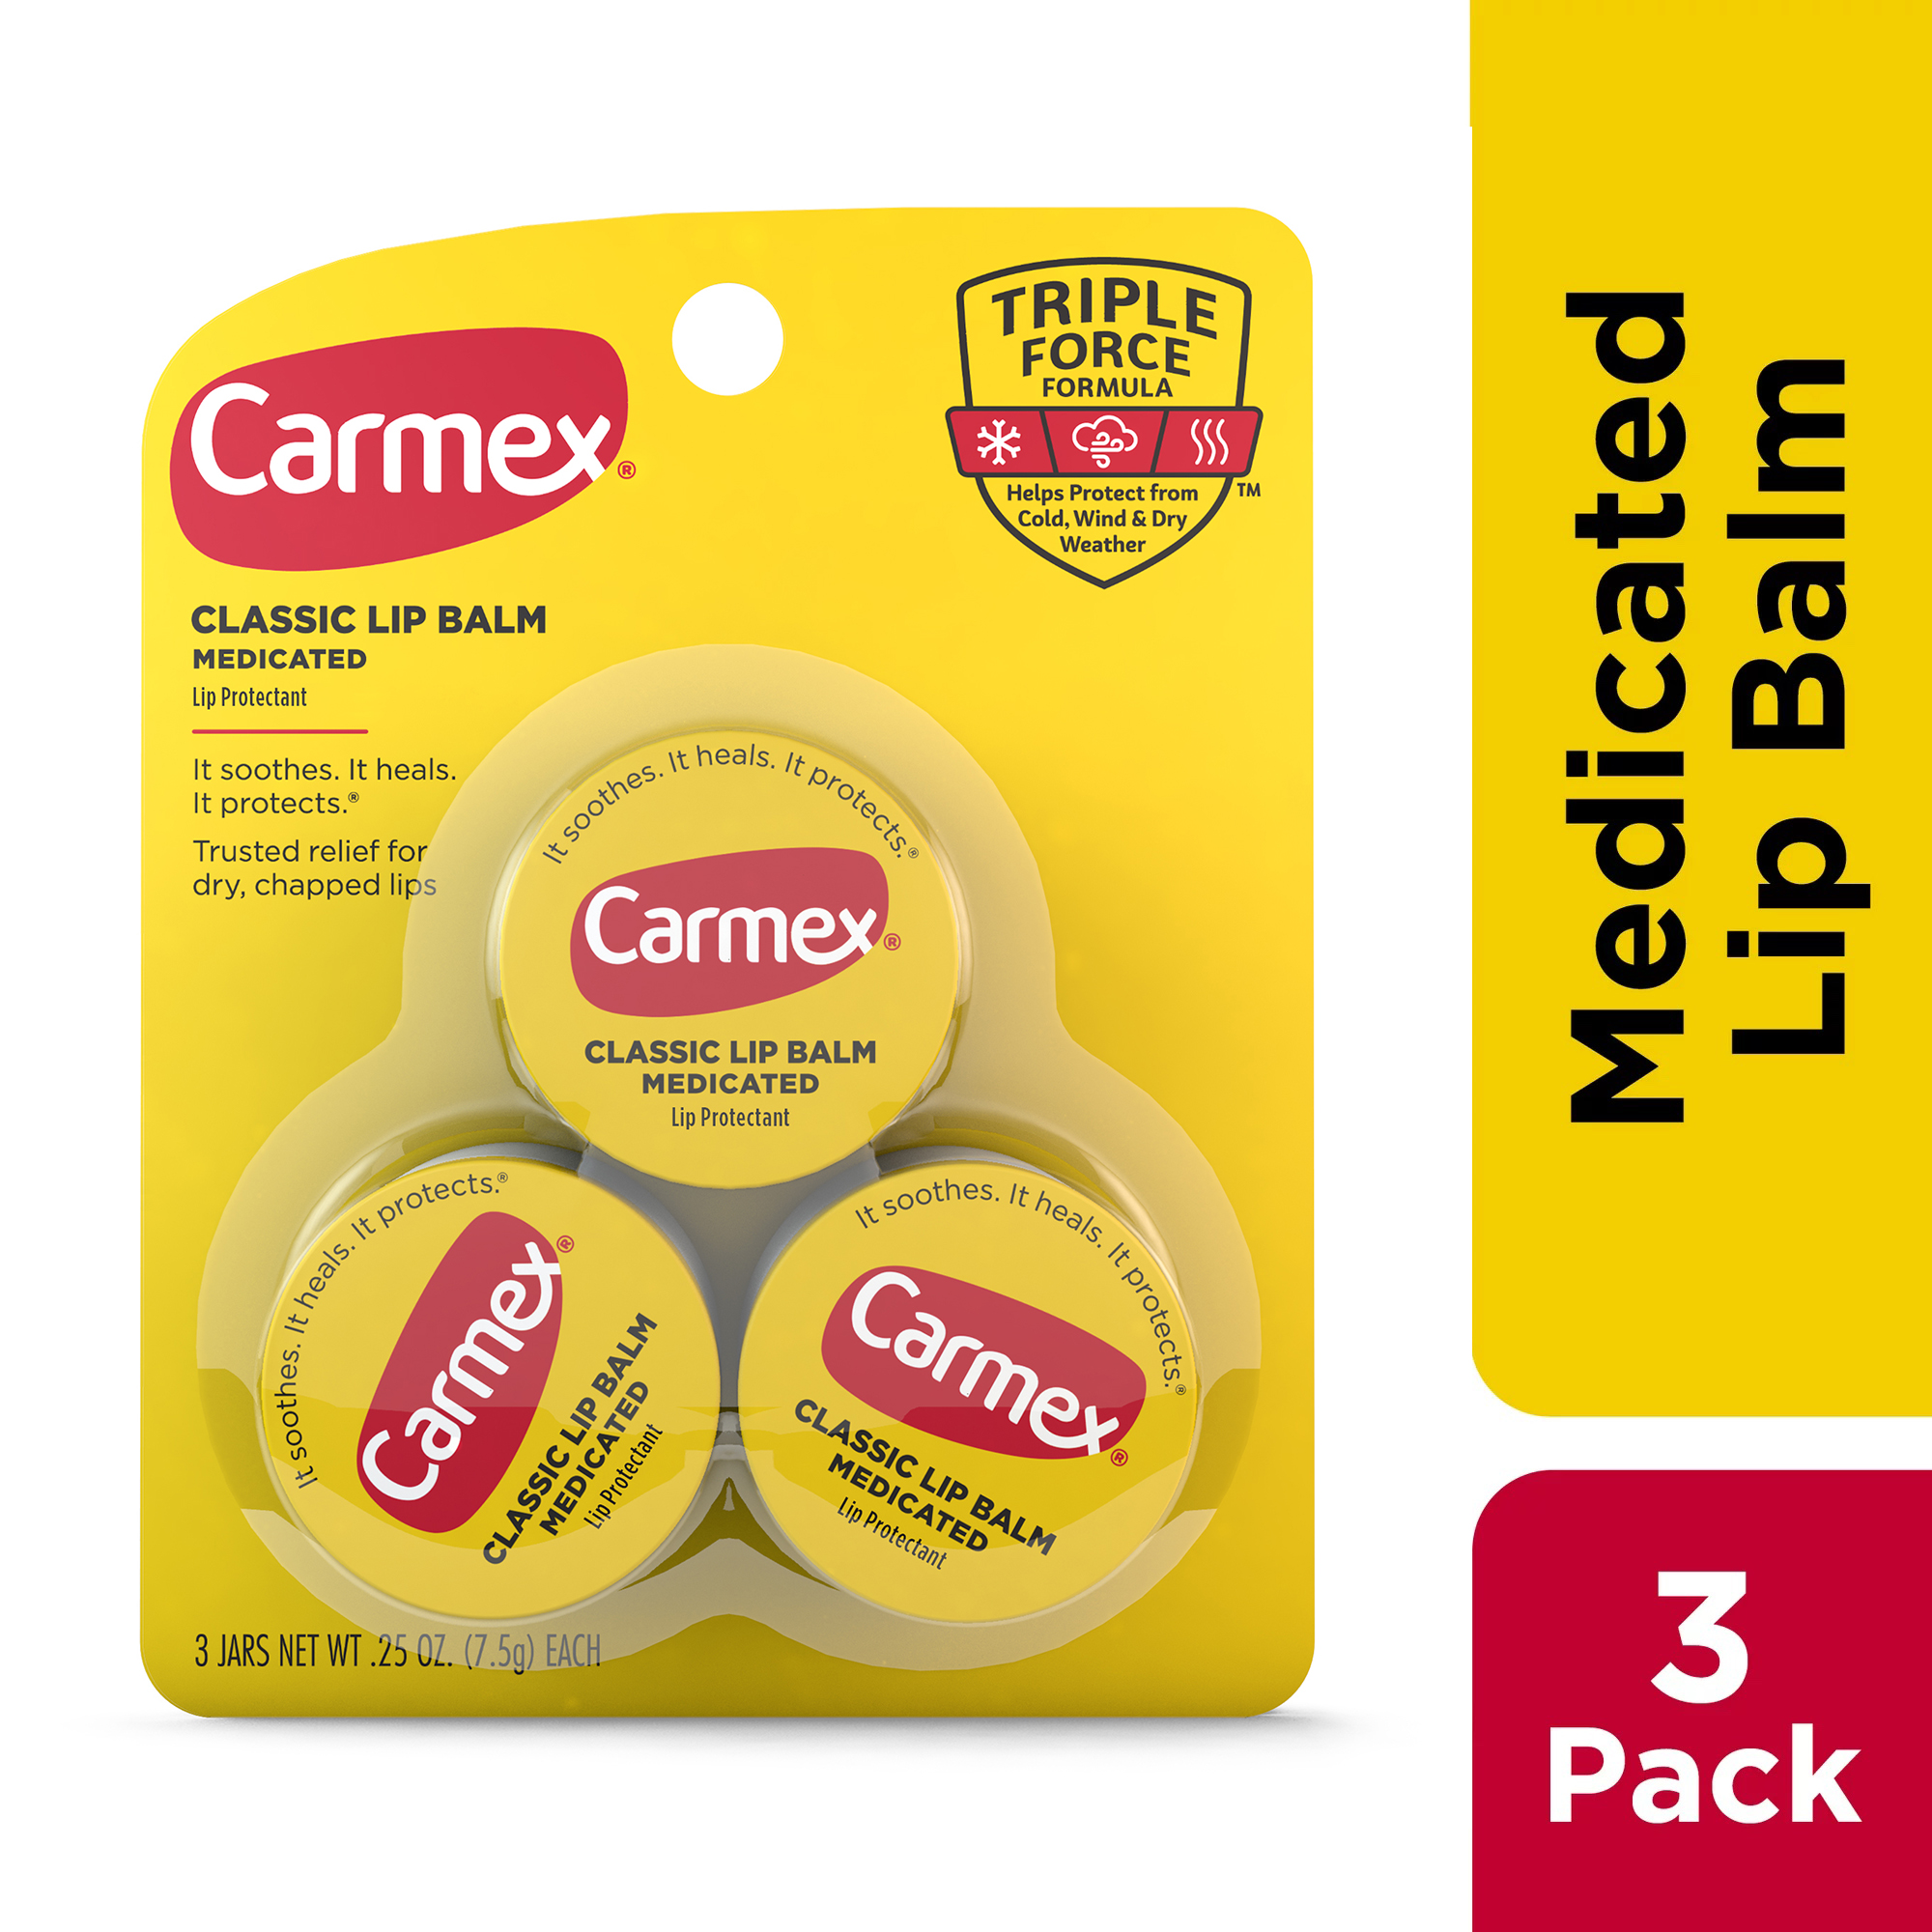 Carmex Classic Medicated Lip Balm Jars, Lip Moisturizer, 3 Count (1 Pack of 3) - image 1 of 12